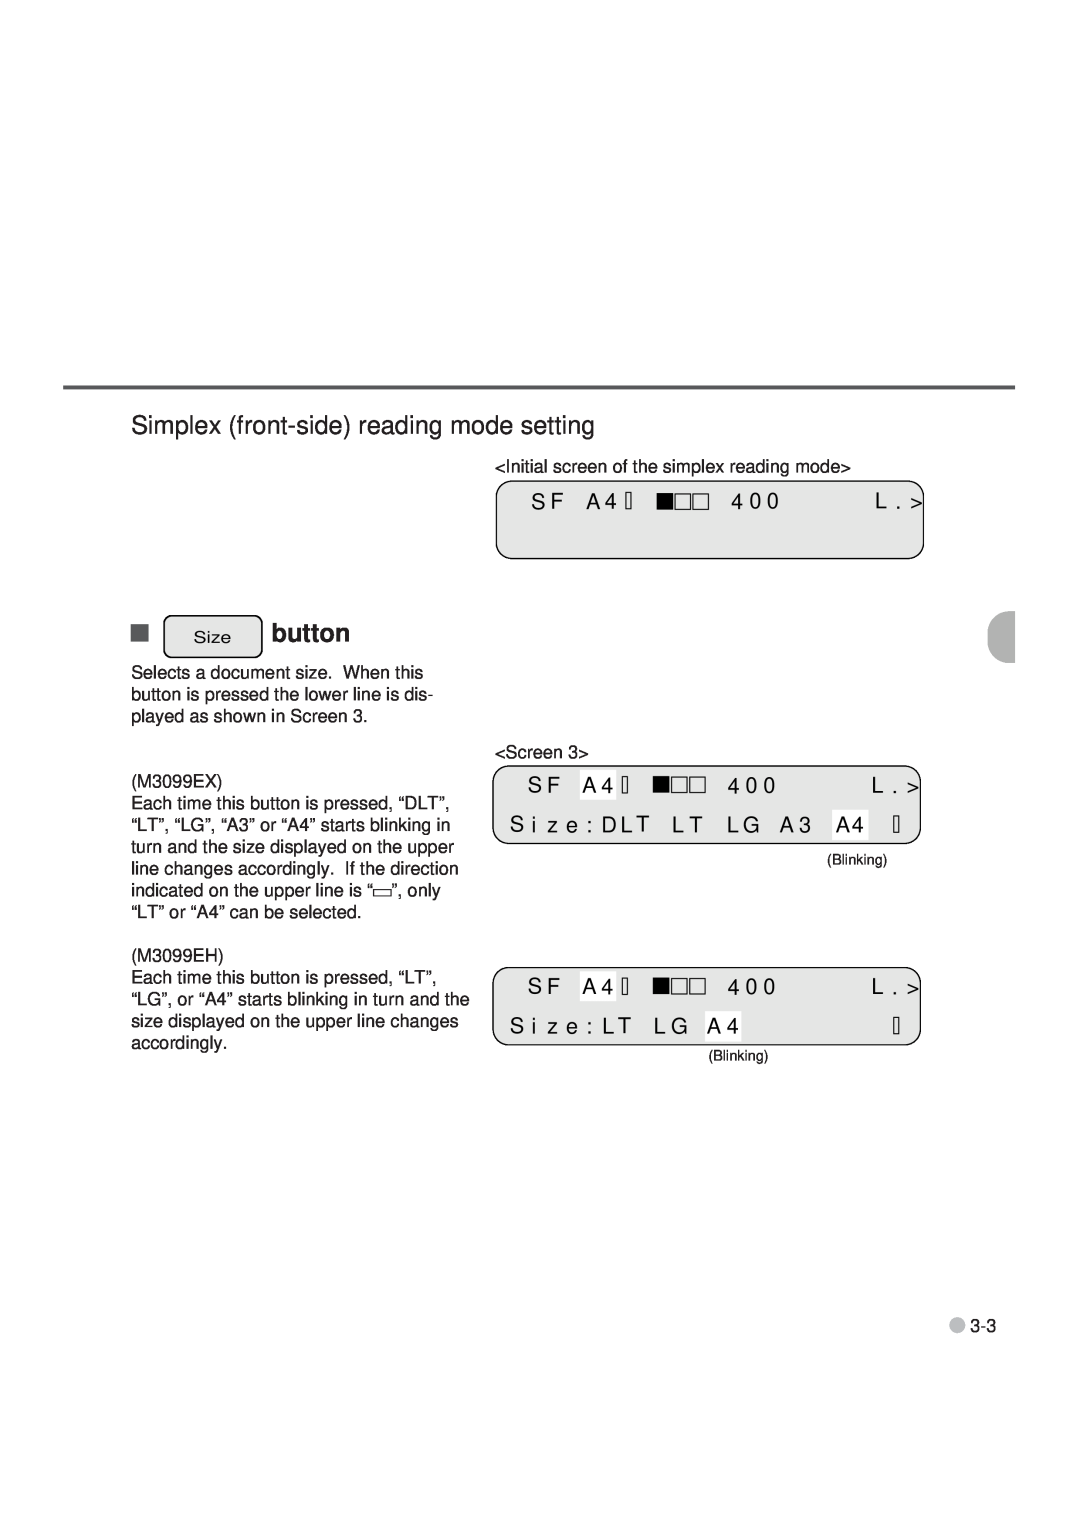 Fujitsu M3099EX, M3099GX, M3099GH, M3099EH manual Simplex front-side reading mode setting, Size button 